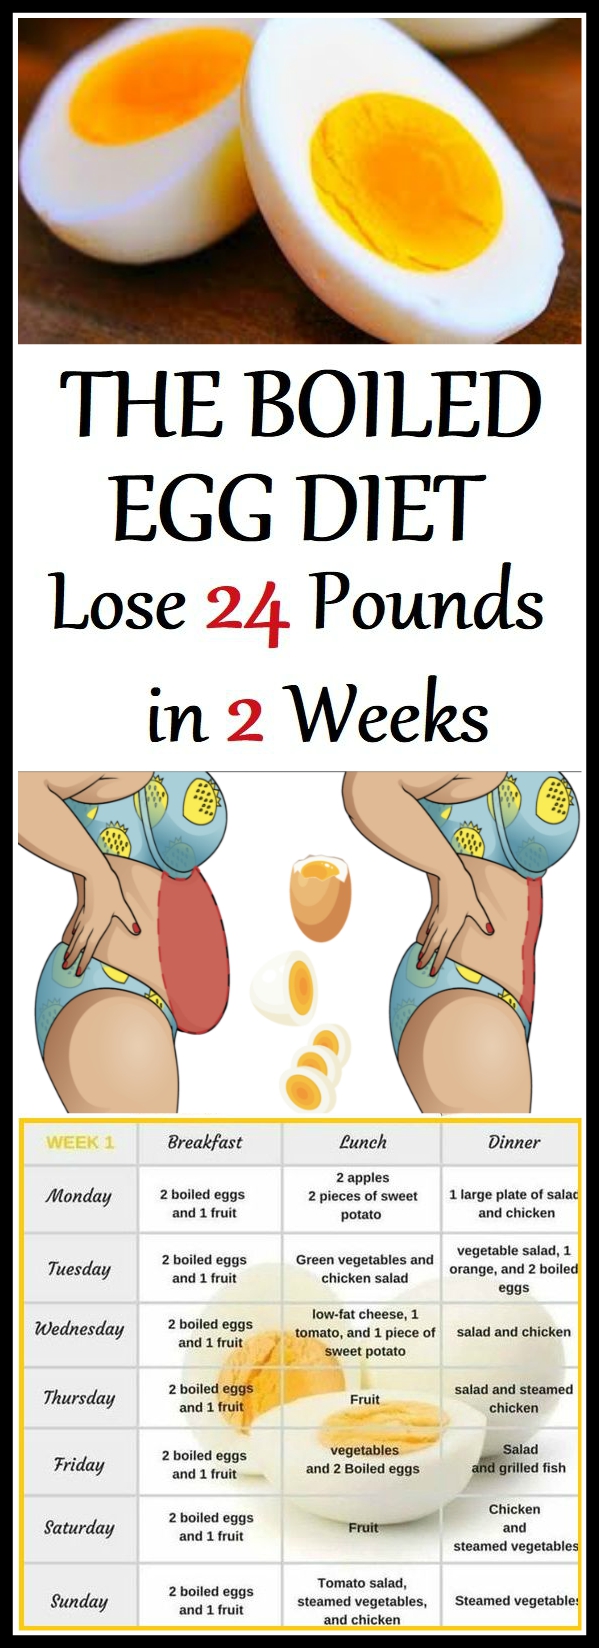 The Boiled Egg Diet Lose 24 Pounds in 2 Weeks The Boiled Egg Diet Lose 24 Pounds in 2 Weeks